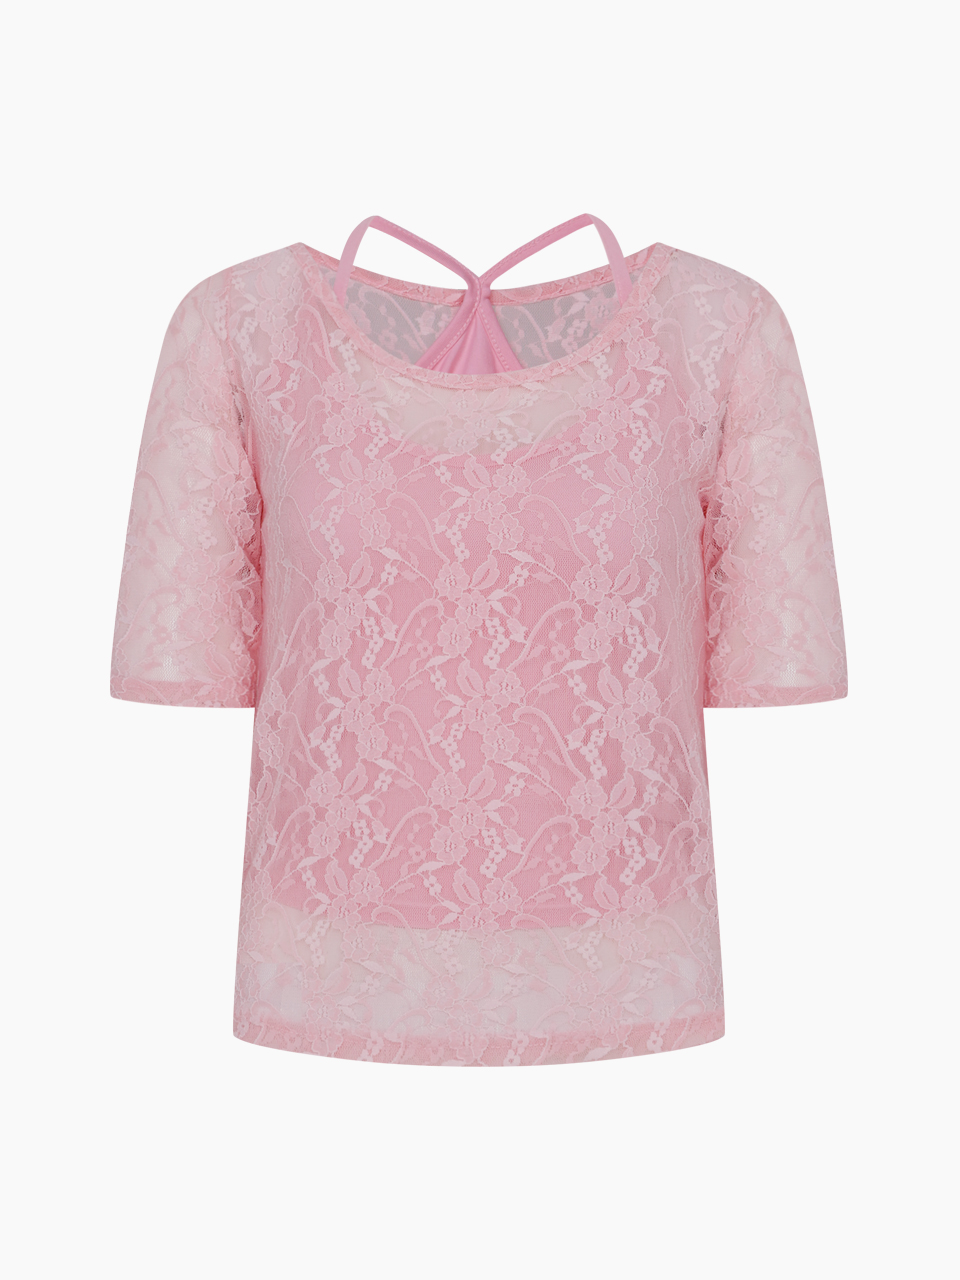 layered lace top - baby pink